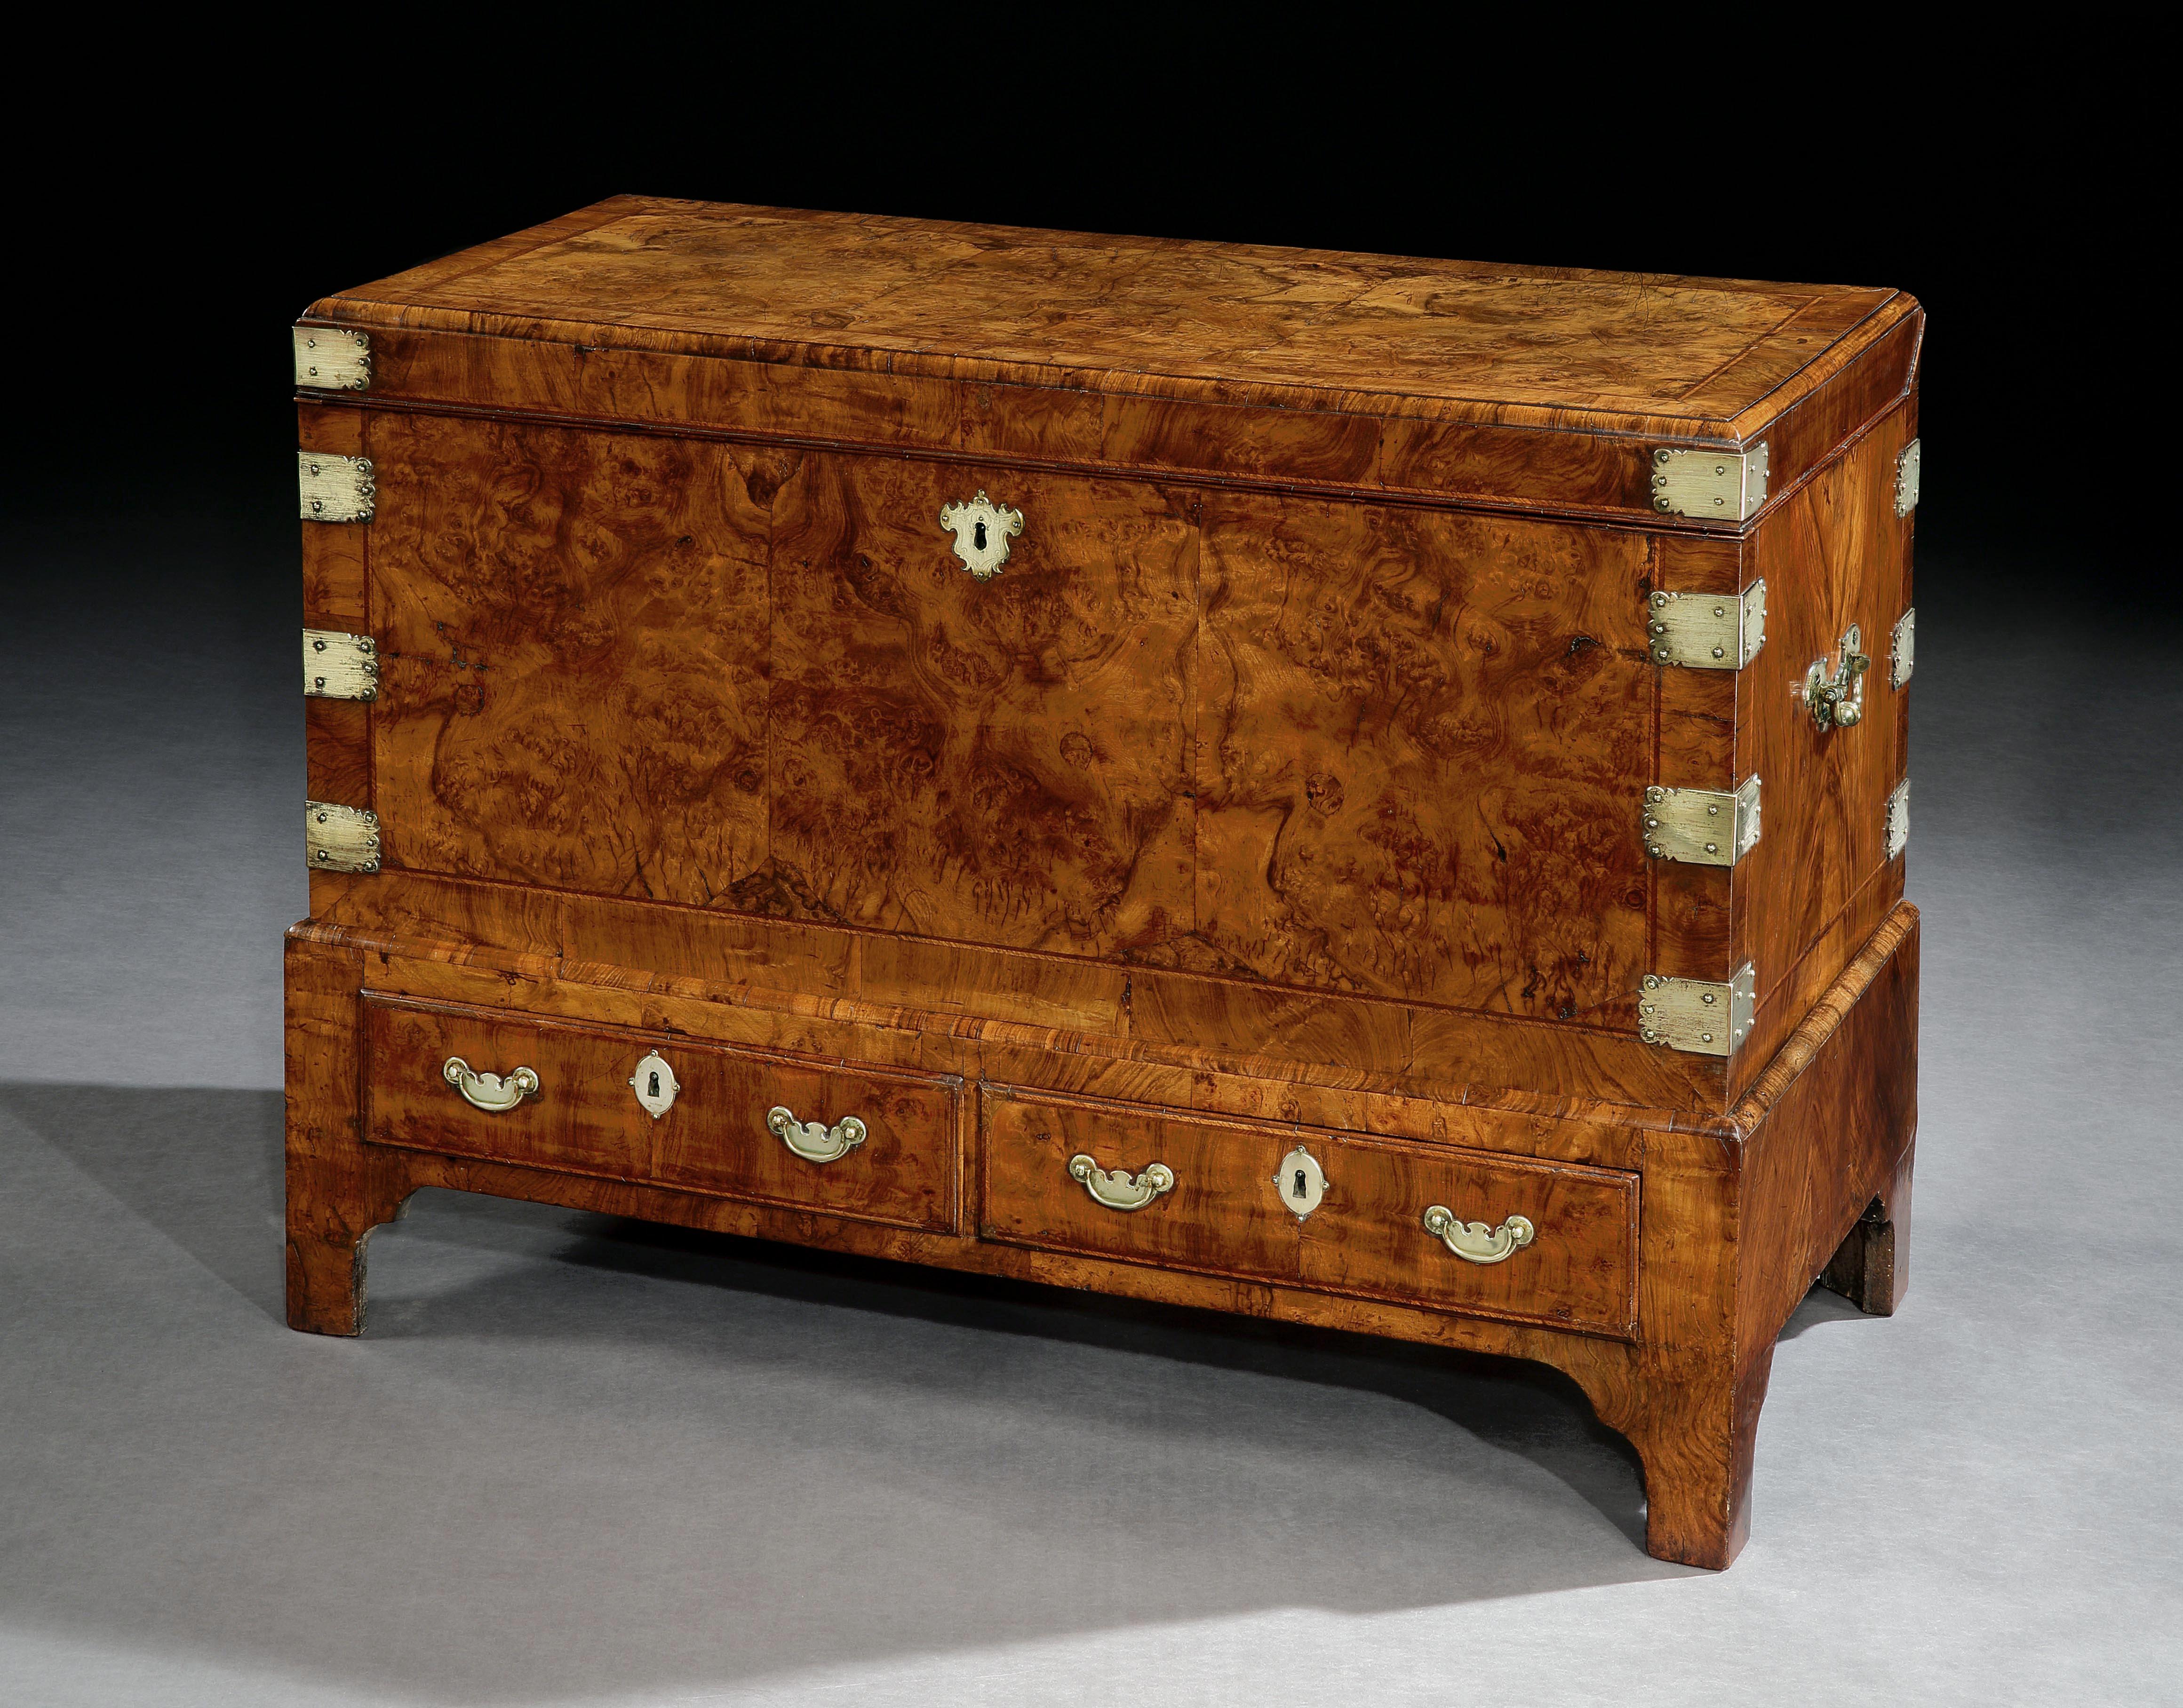 An early 18th century coffer on stand in richly figured walnut crossbanded throughout with feather bandings. The hinged upper part with brass-mounted corners and carrying handles. The lower part is fitted with two drawers with brass handles and